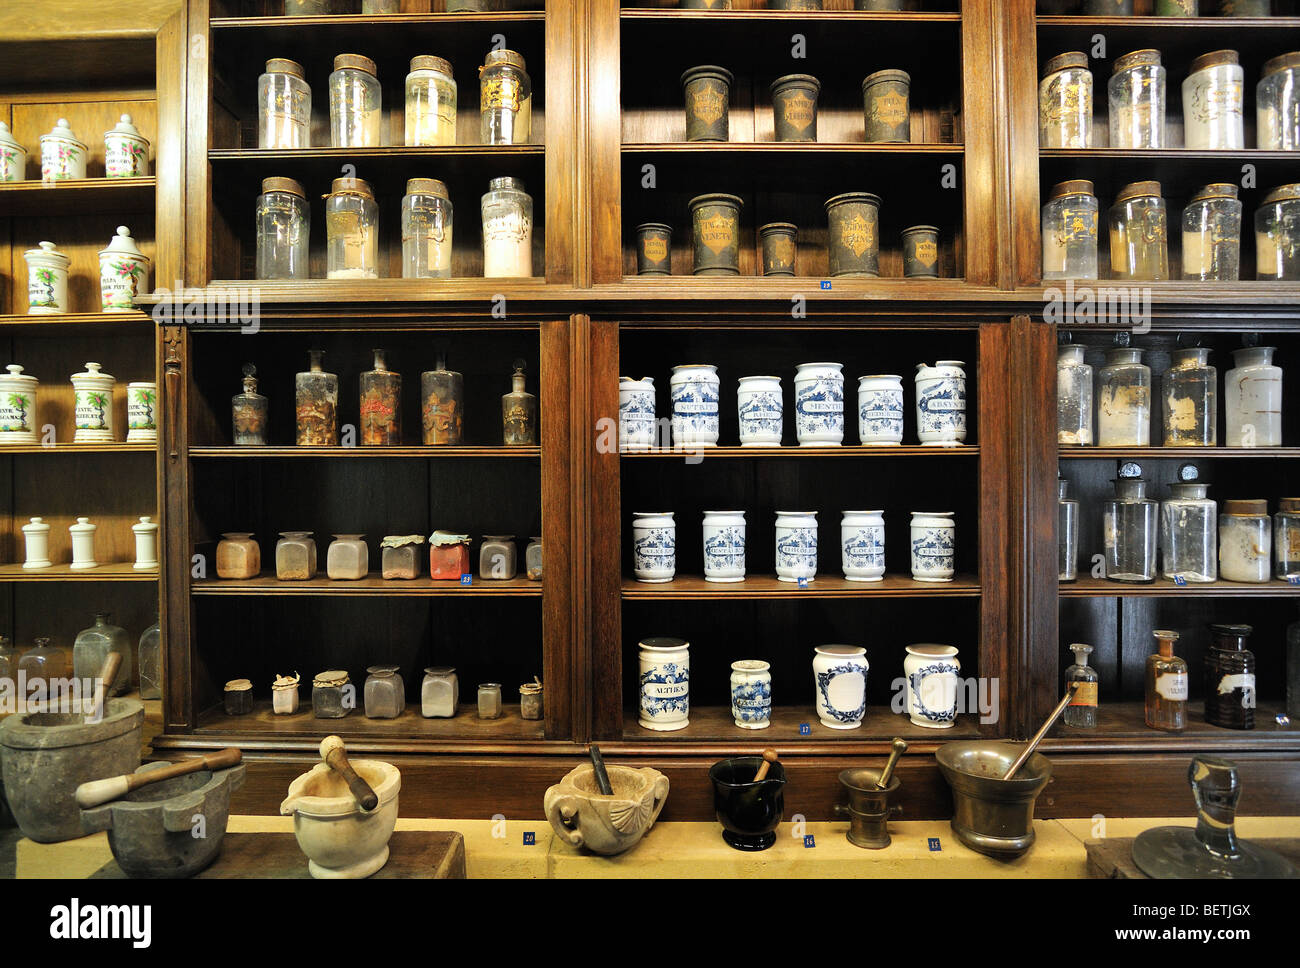 Apothecary cabinet of old pharmacy showing pots and jars with medicines in the Orval Abbey / Abbaye Notre-Dame d'Orval, Belgium Stock Photo